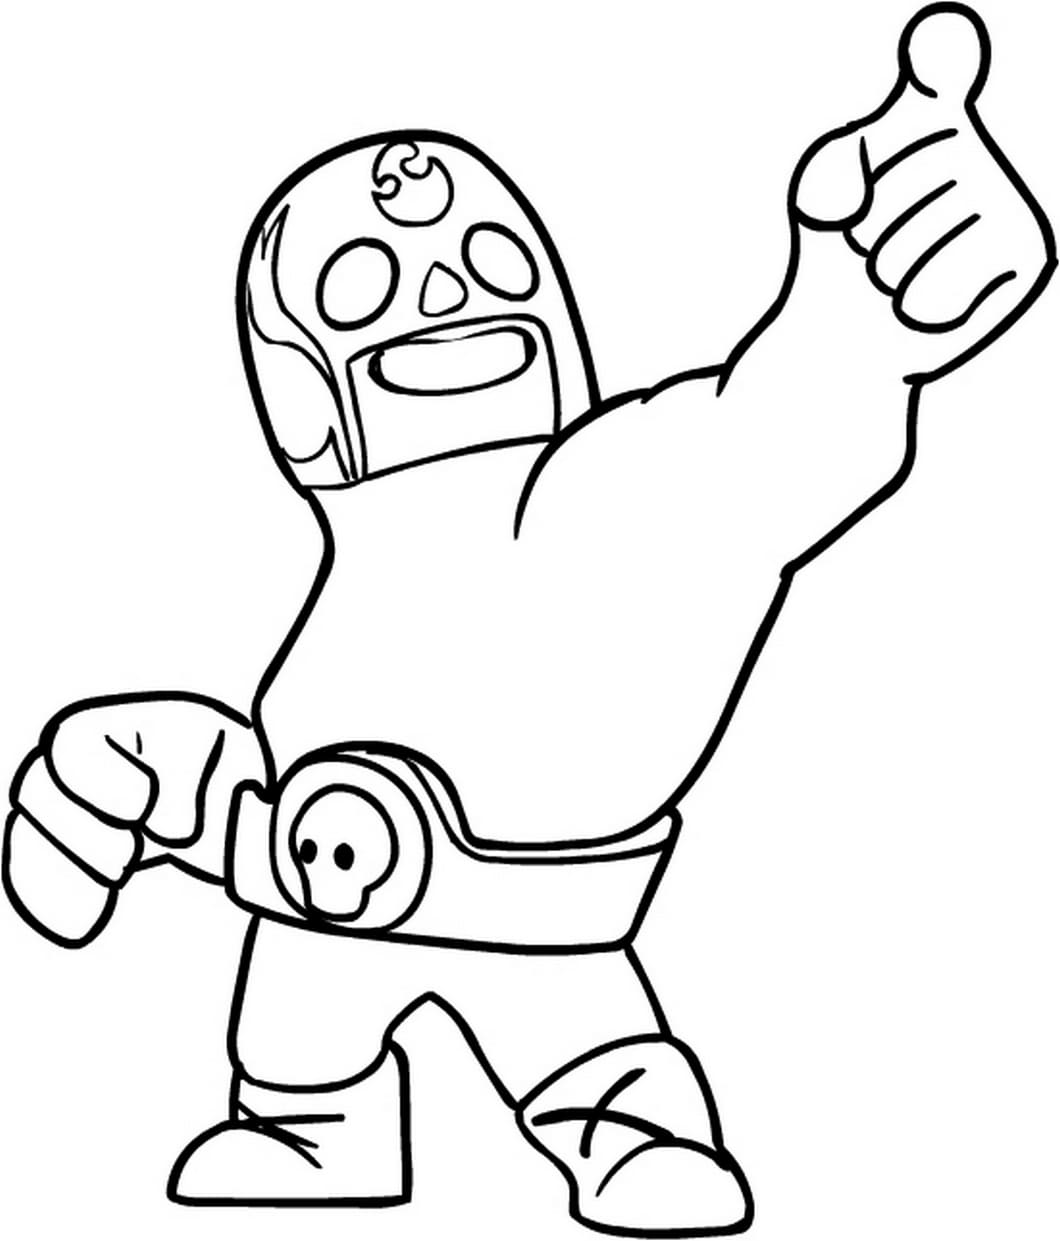 Brawl Stars Coloring Pages Coloring Home - pintar do brawl stars